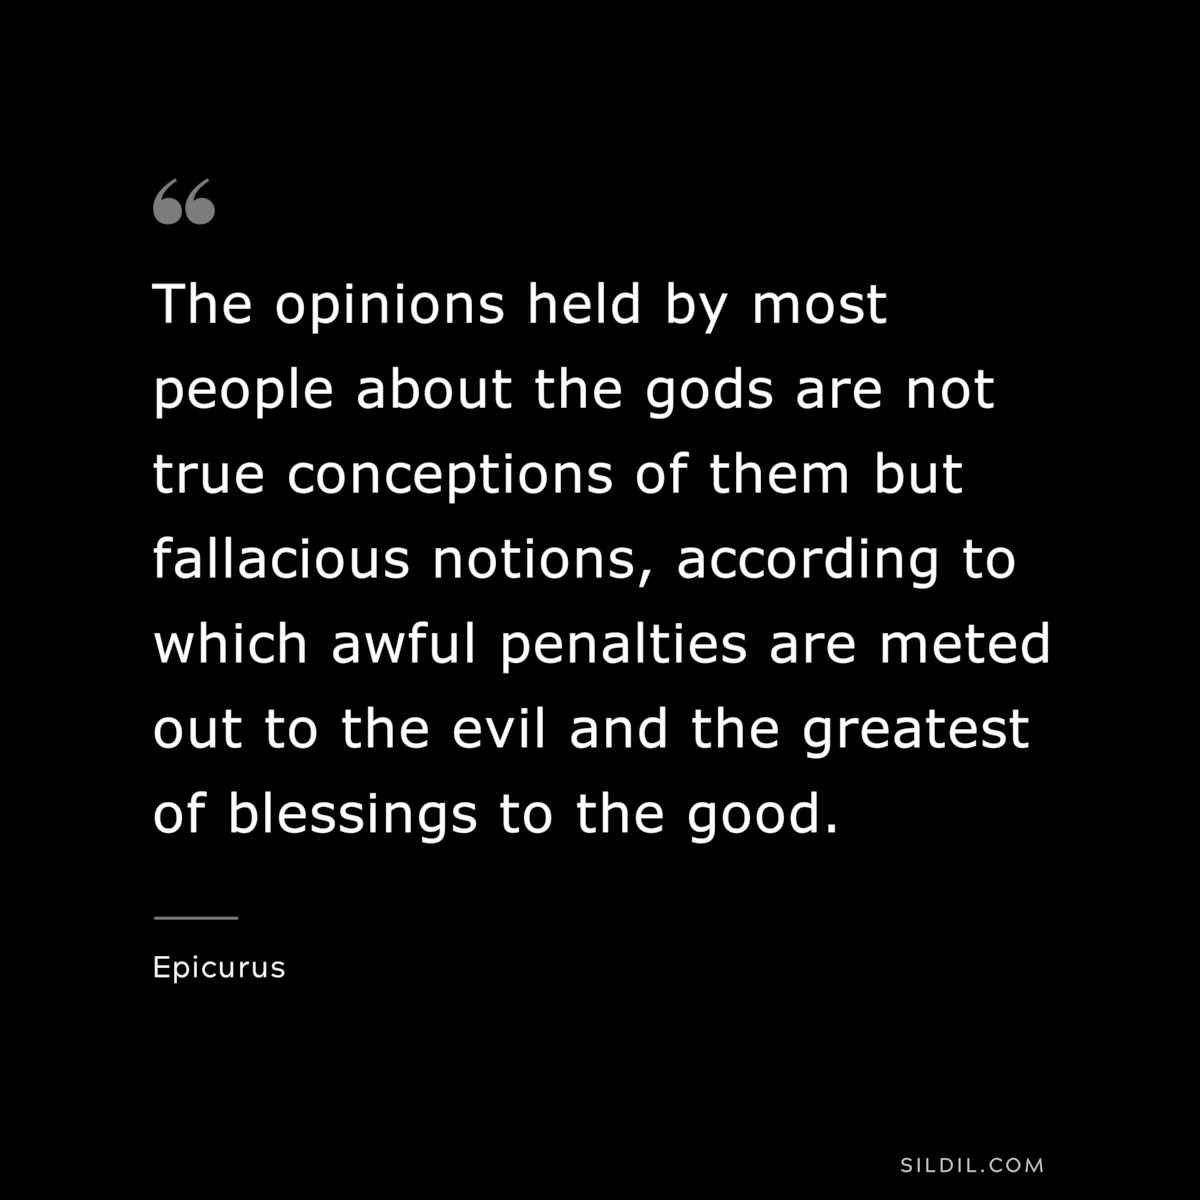 The opinions held by most people about the gods are not true conceptions of them but fallacious notions, according to which awful penalties are meted out to the evil and the greatest of blessings to the good. — Epicurus